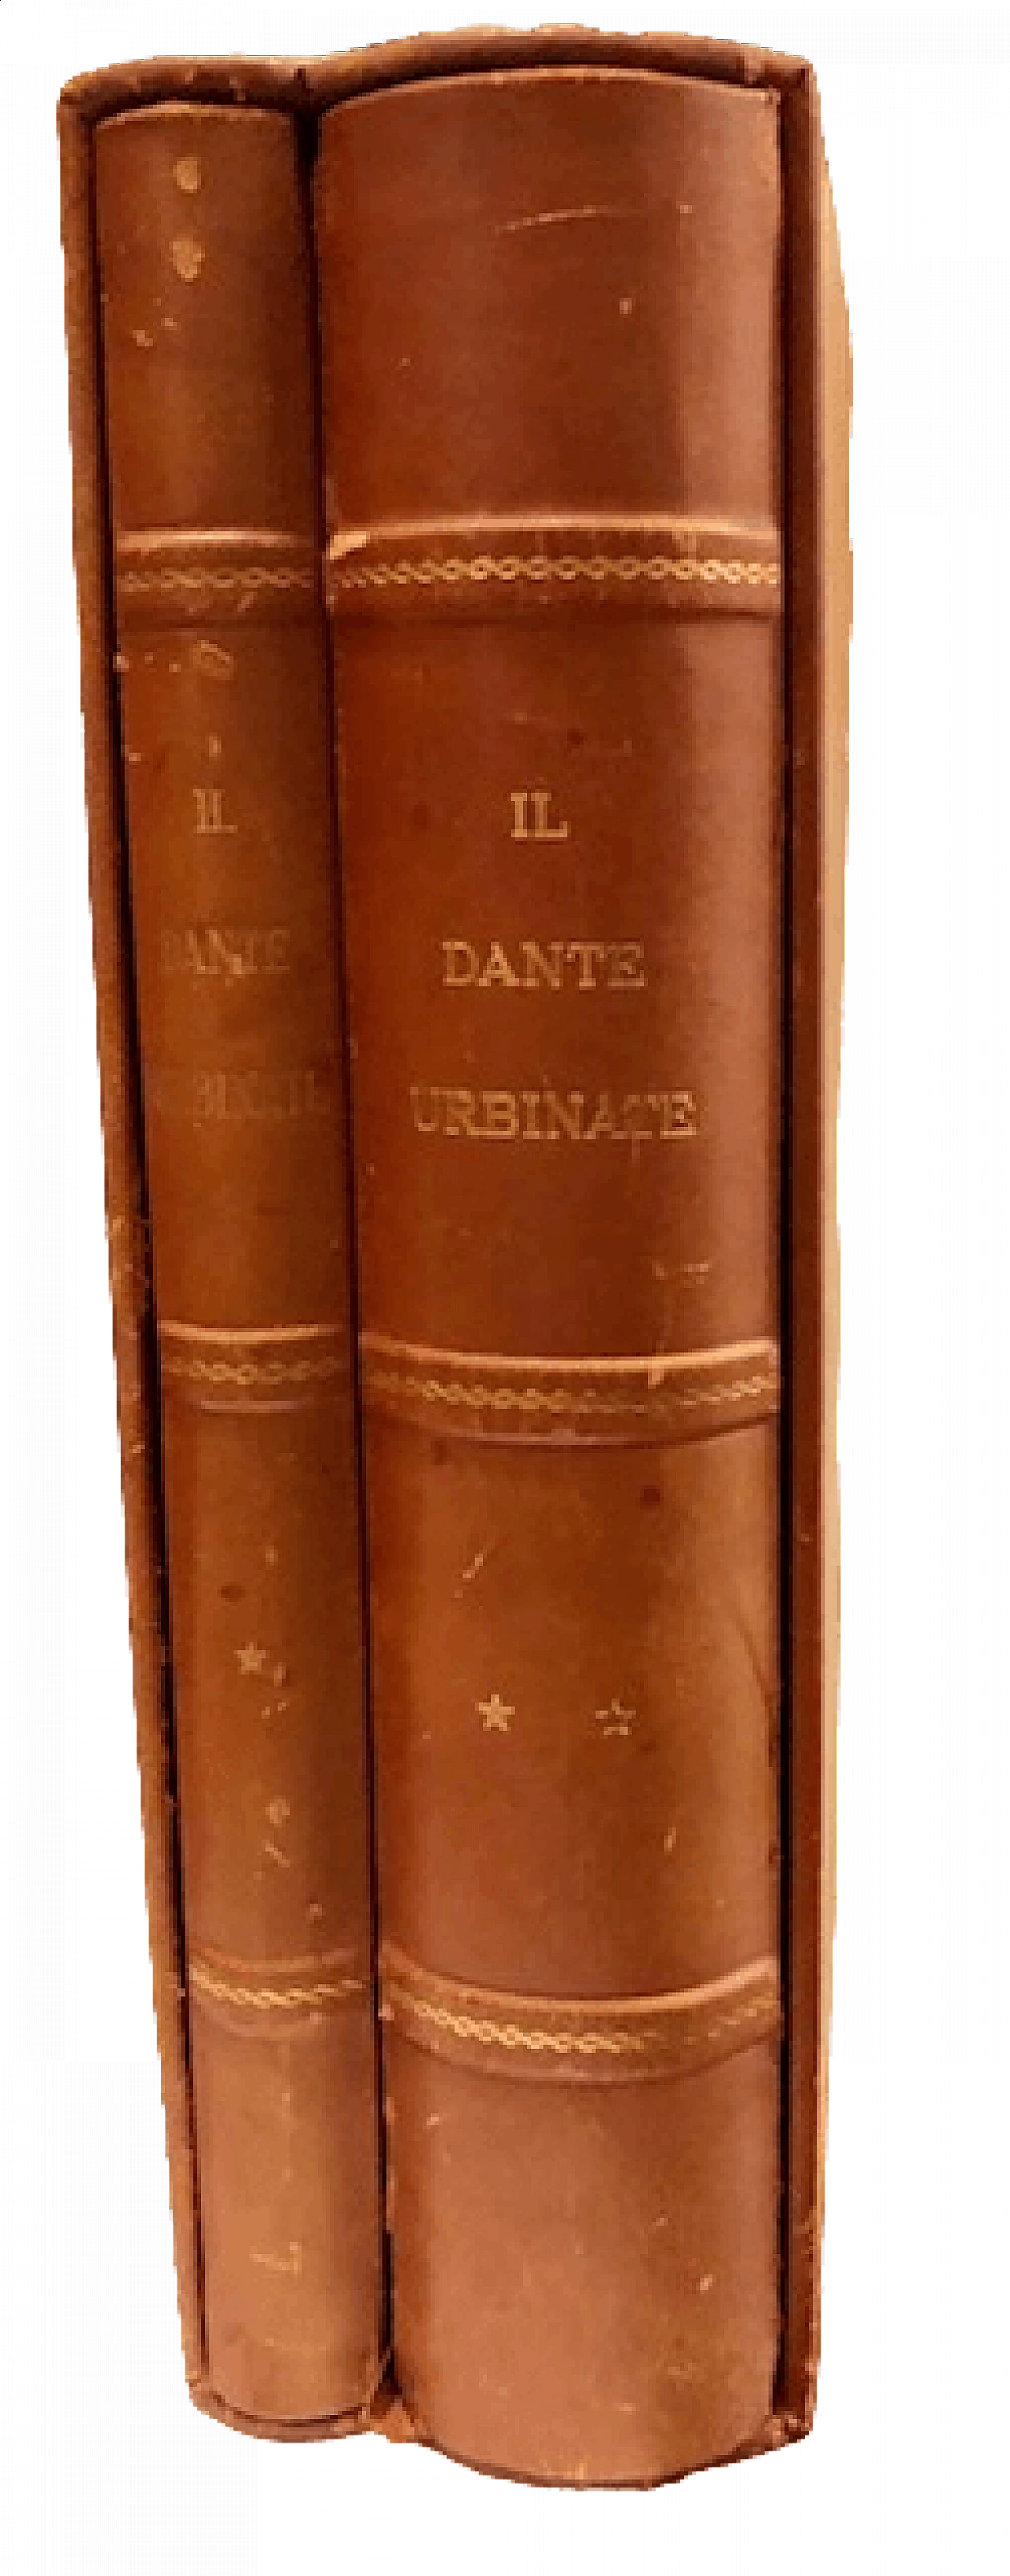 Reproduction of The Dante Urbinate from The Vatican Library 6